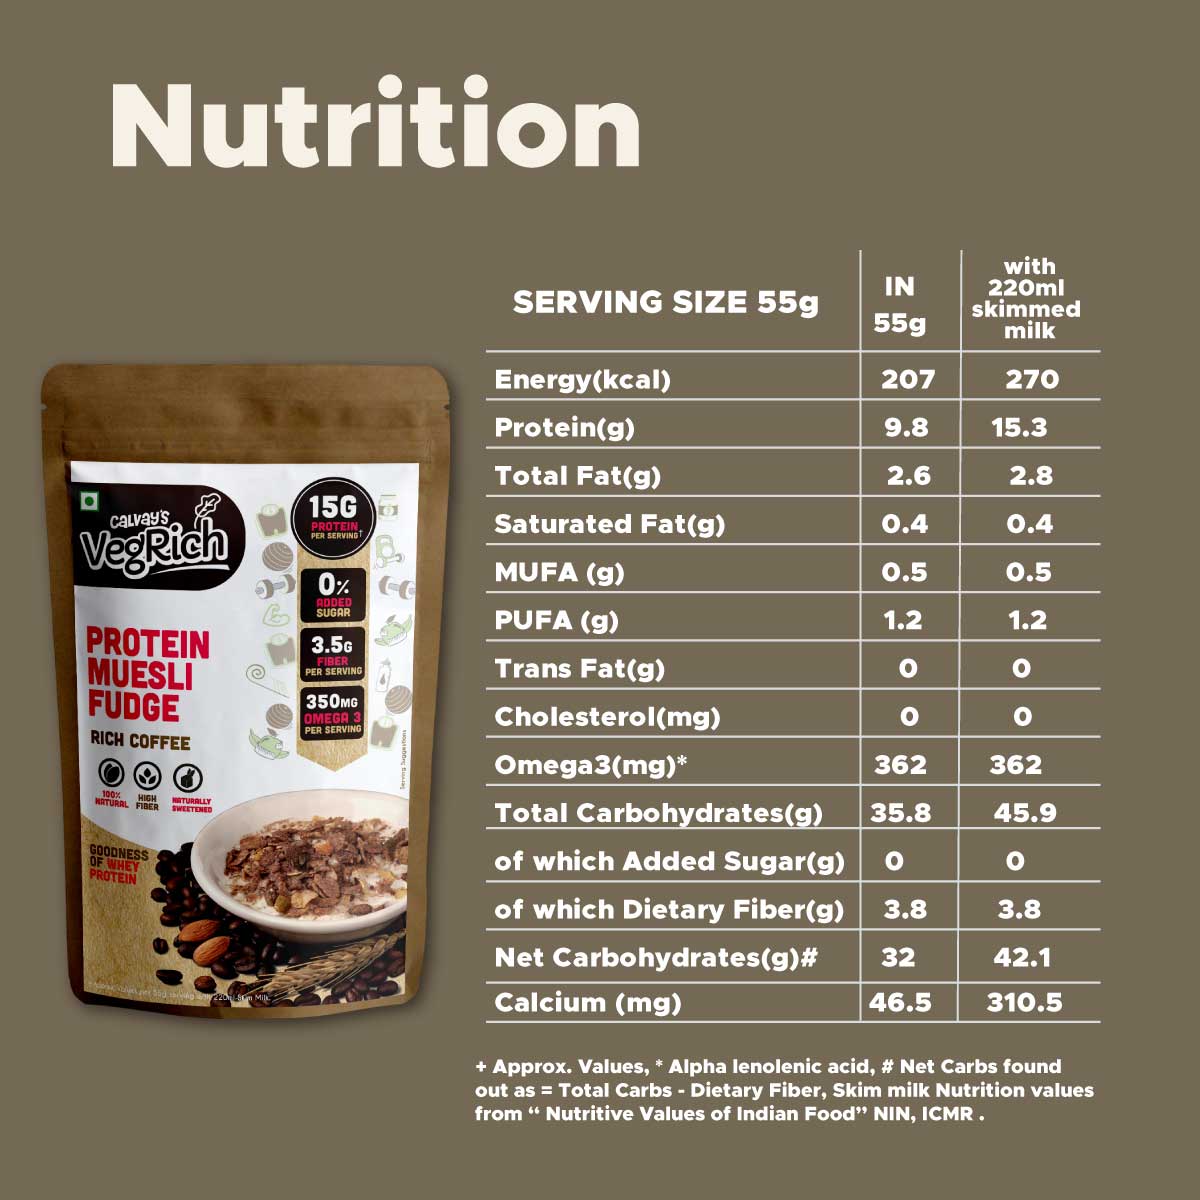 Nutrition information for protein muesli Rich Coffee